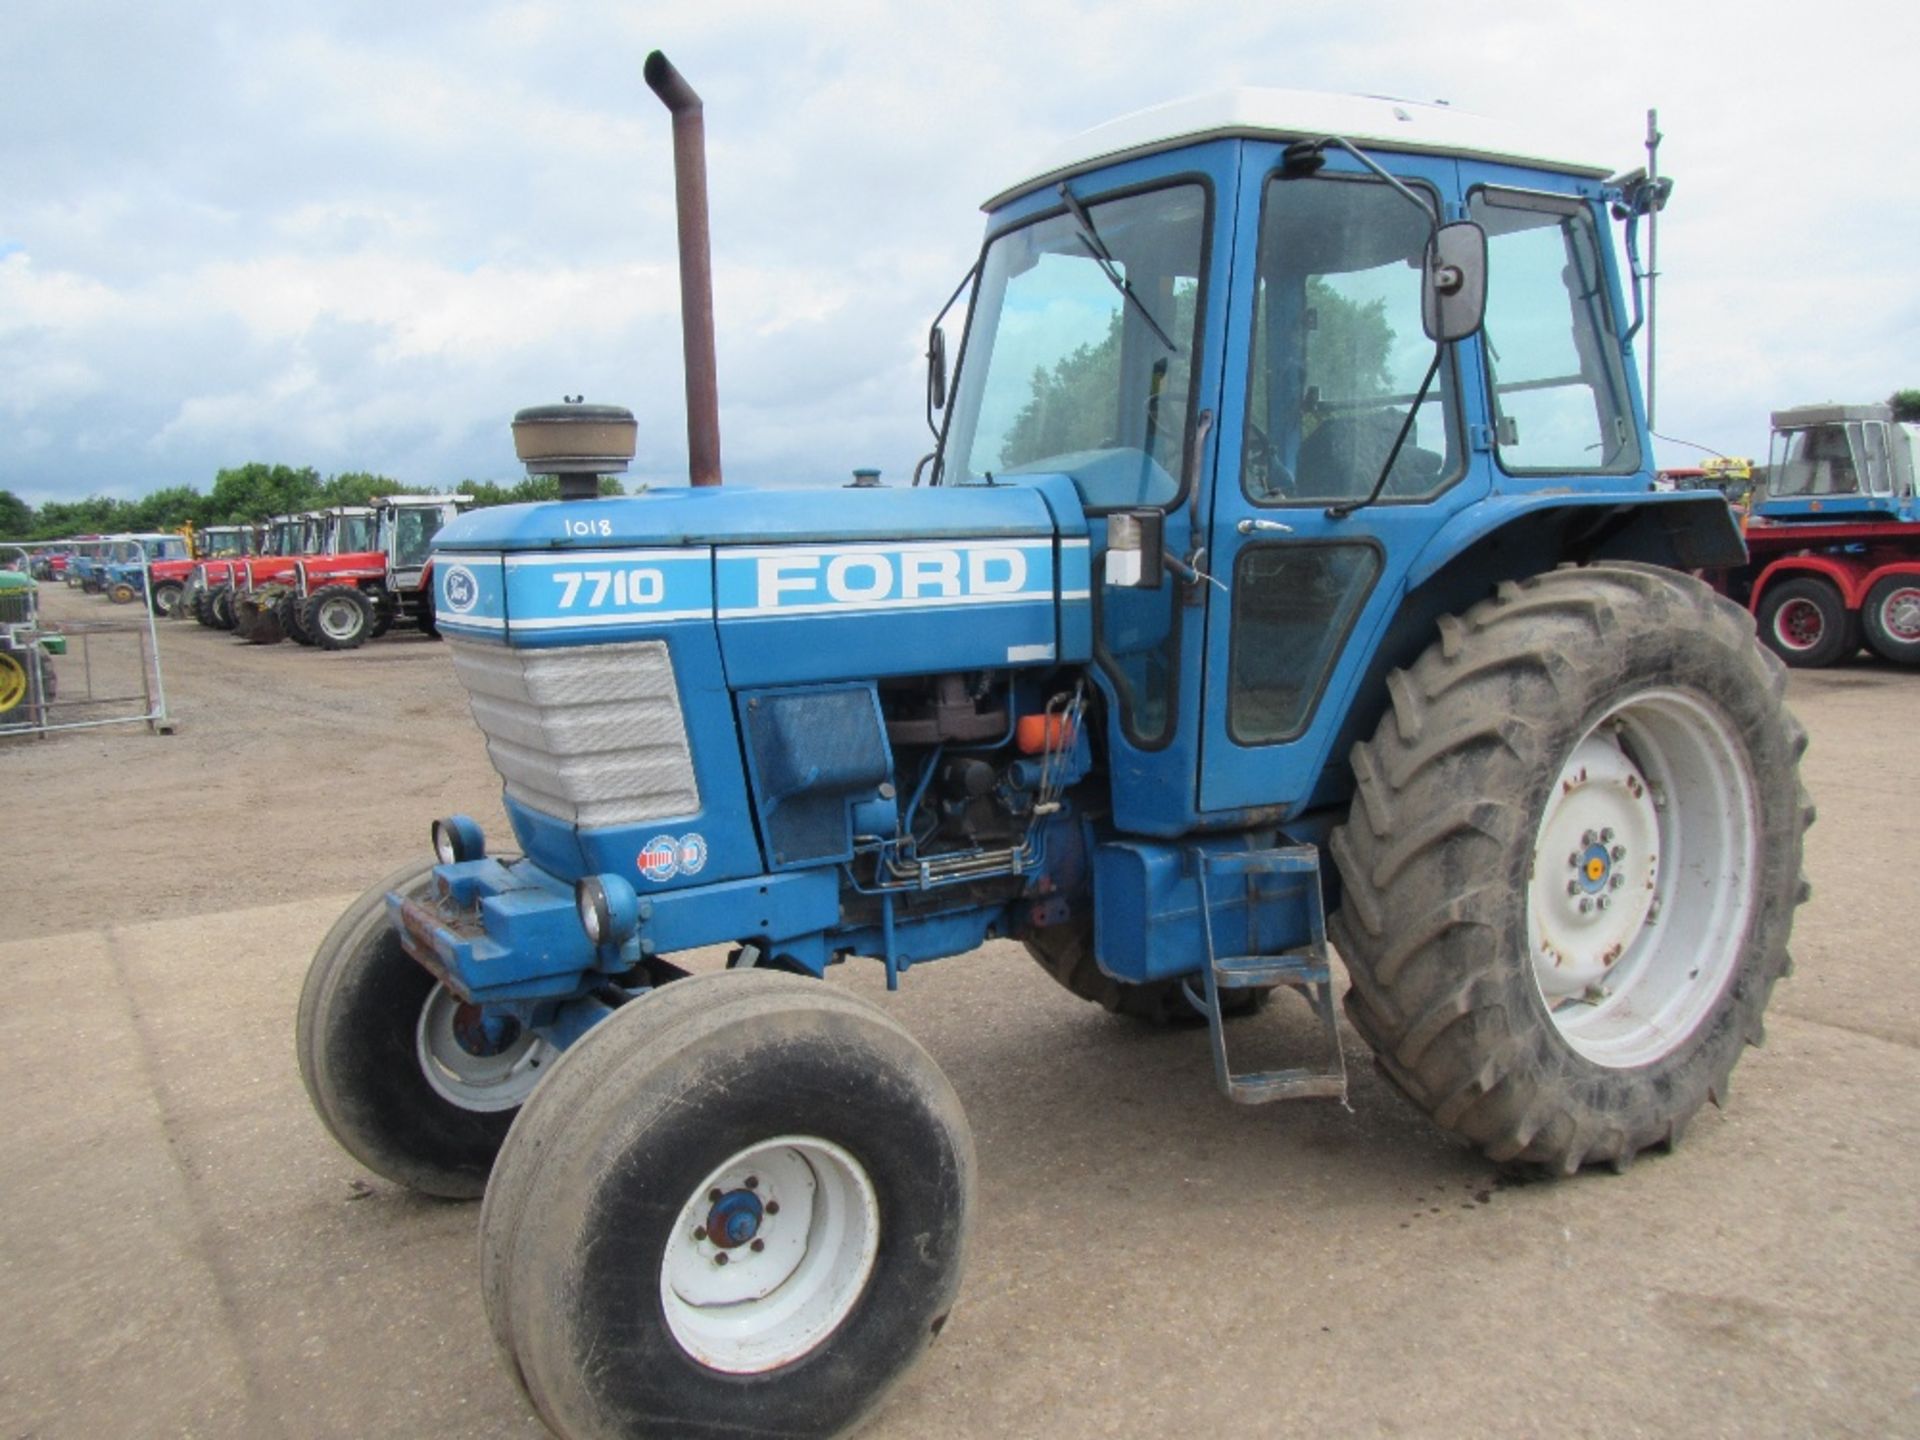 Ford 7710 2wd Tractor. Ser. No. B400597 - Image 2 of 18